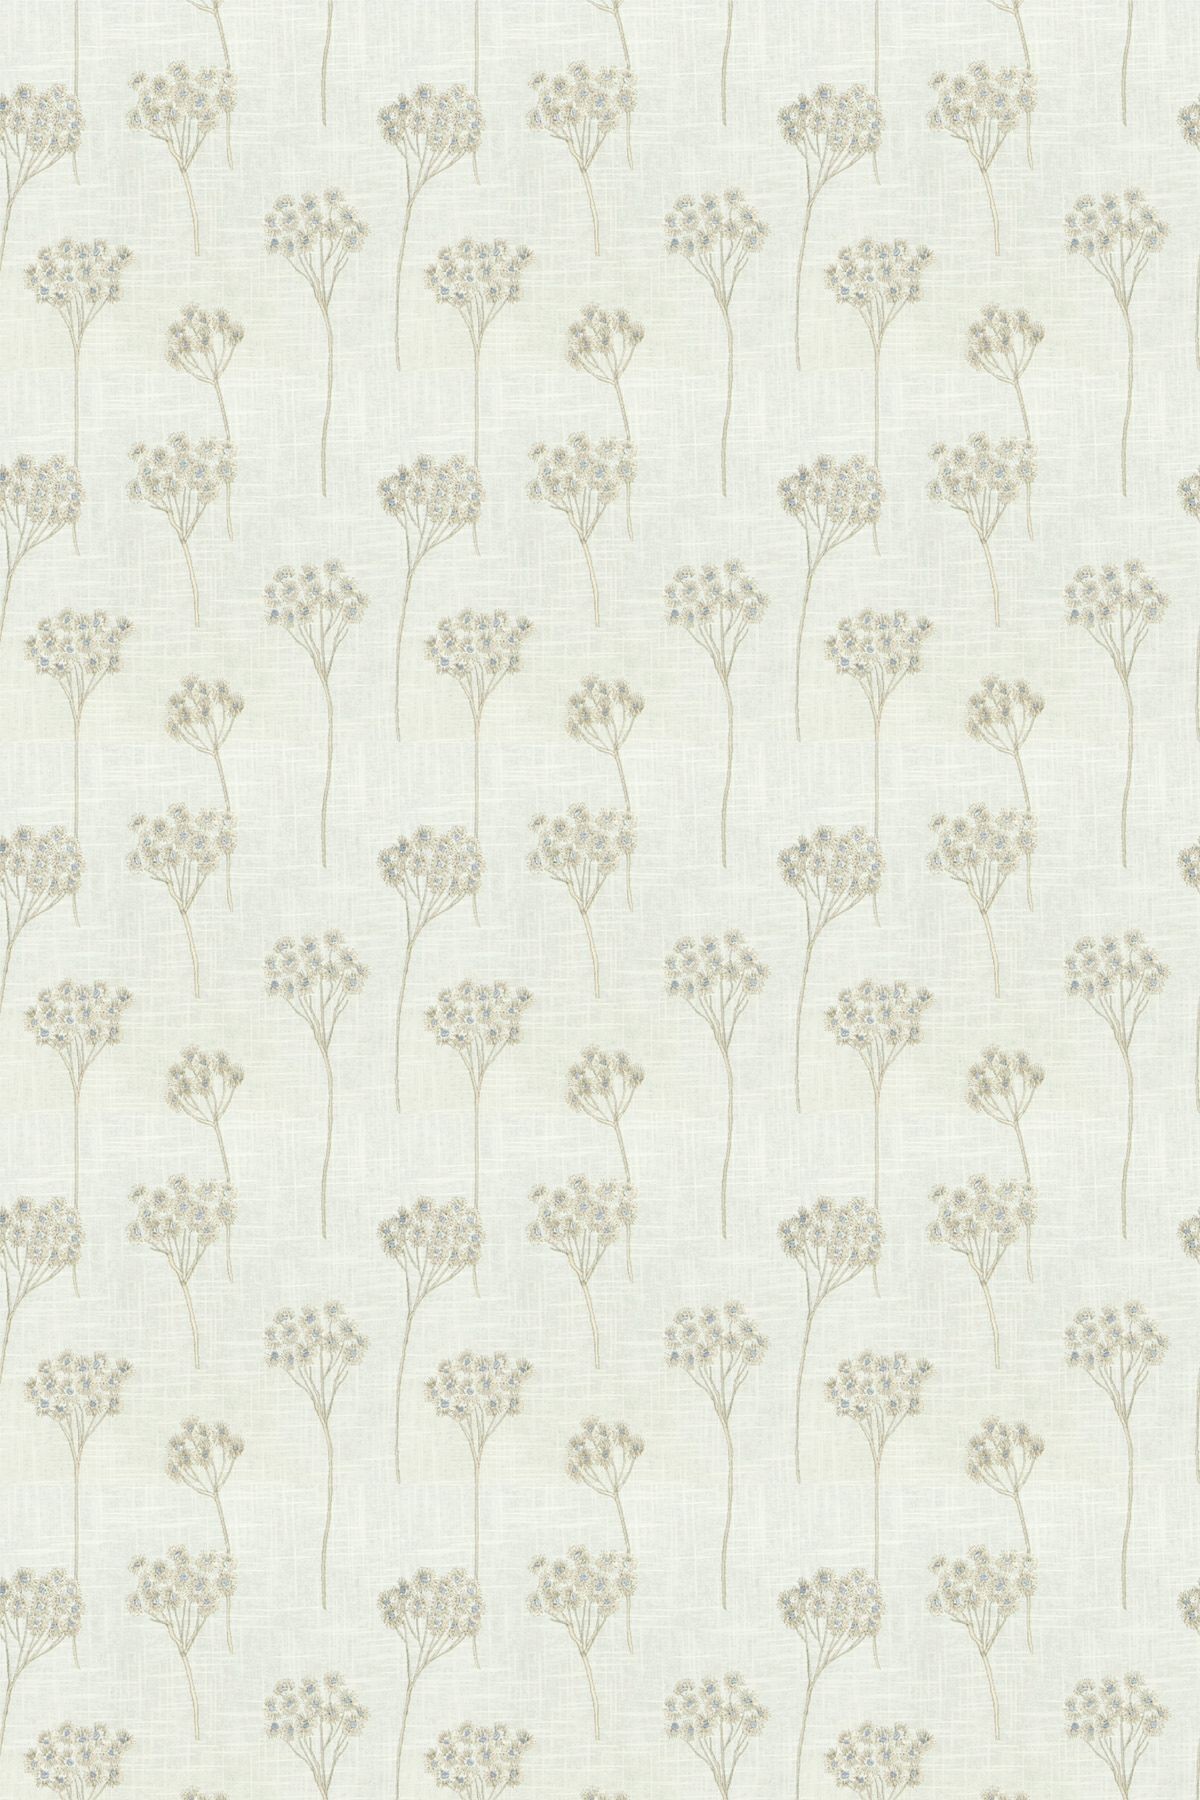 Cow Parsley Wallpaper  Parchment  By Cole and Son  1128027